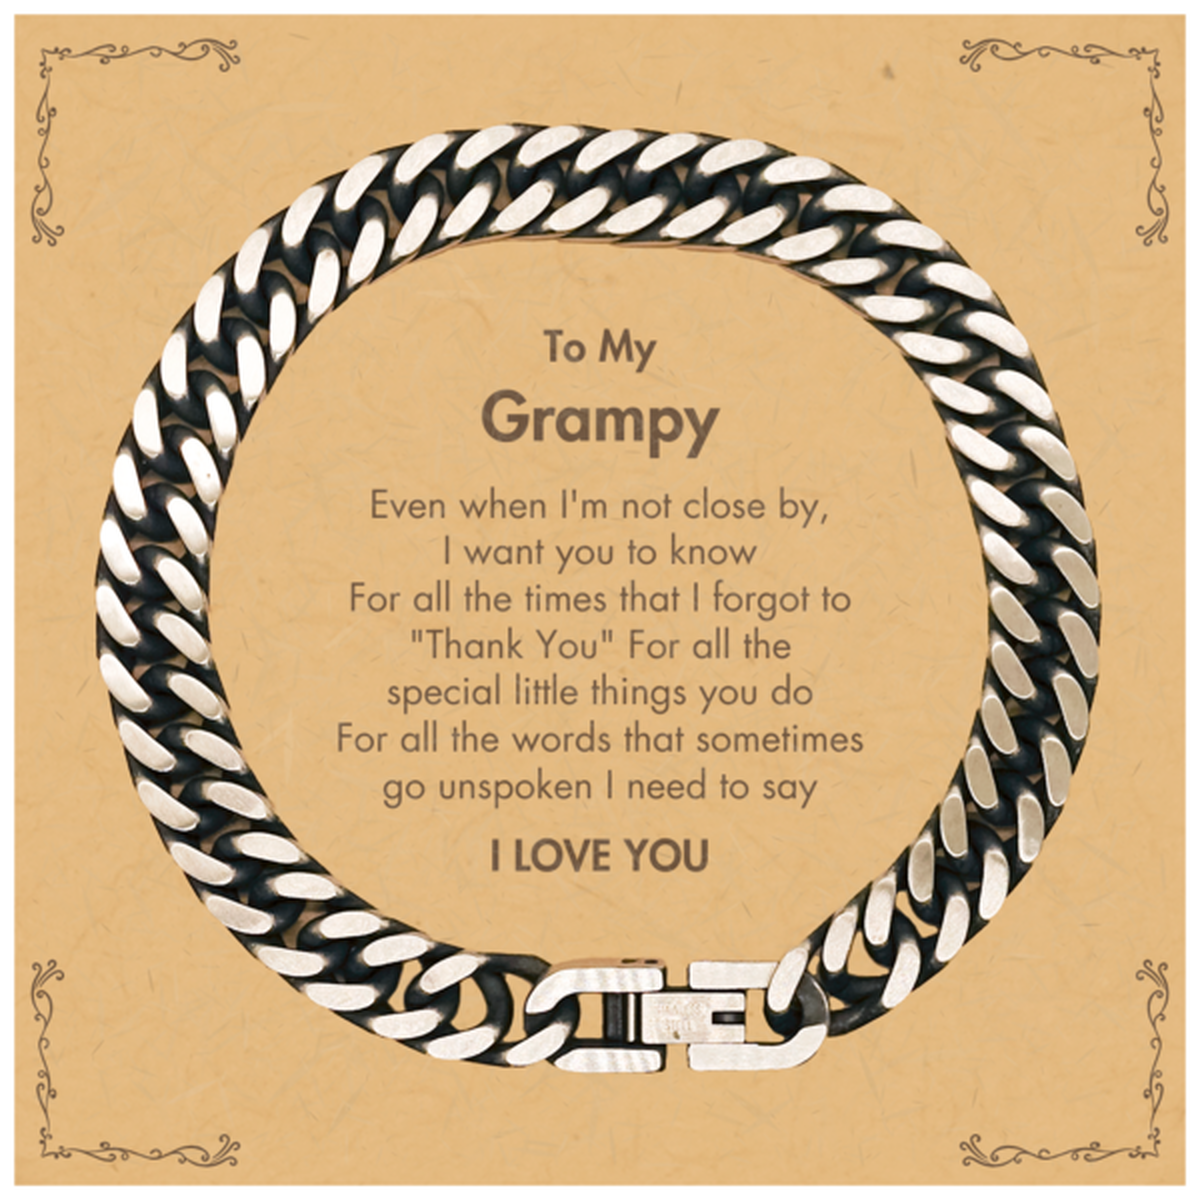 Thank You Gifts for Grampy, Keepsake Cuban Link Chain Bracelet Gifts for Grampy Birthday Mother's day Father's Day Grampy For all the words That sometimes go unspoken I need to say I LOVE YOU